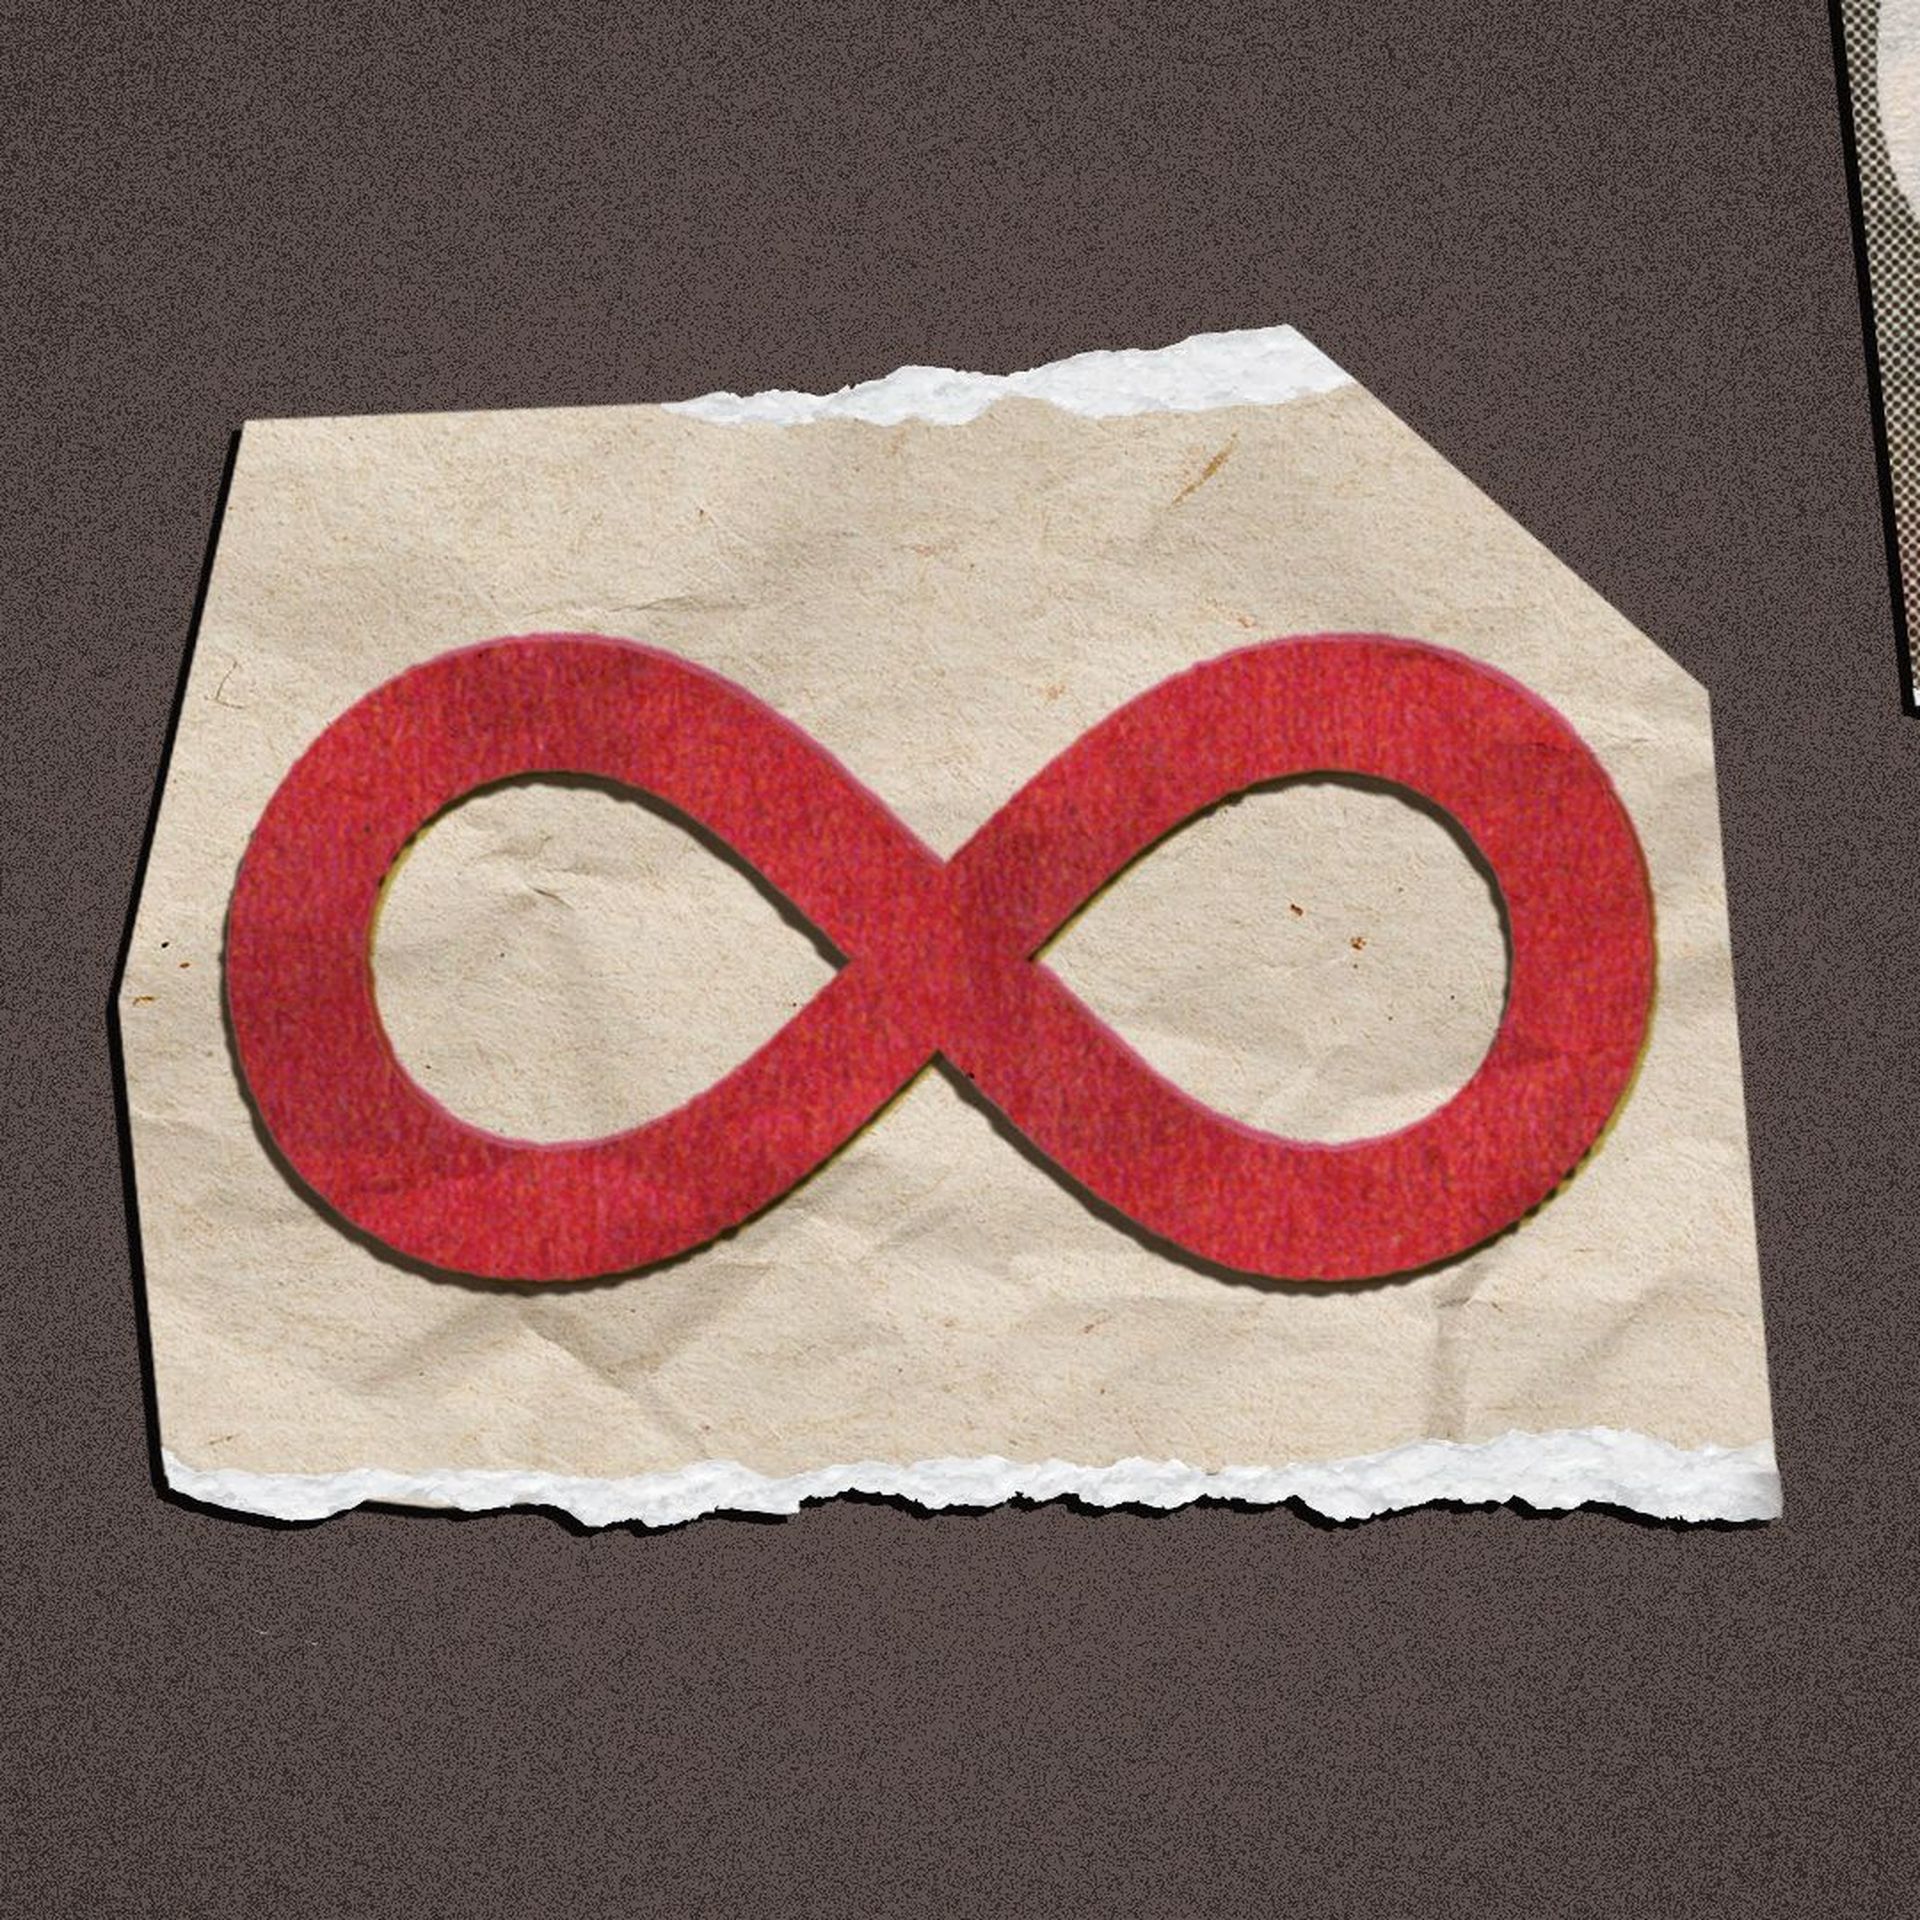 Illustration of cut-out ransom letters with an infinity symbol as the main cut-out letter.